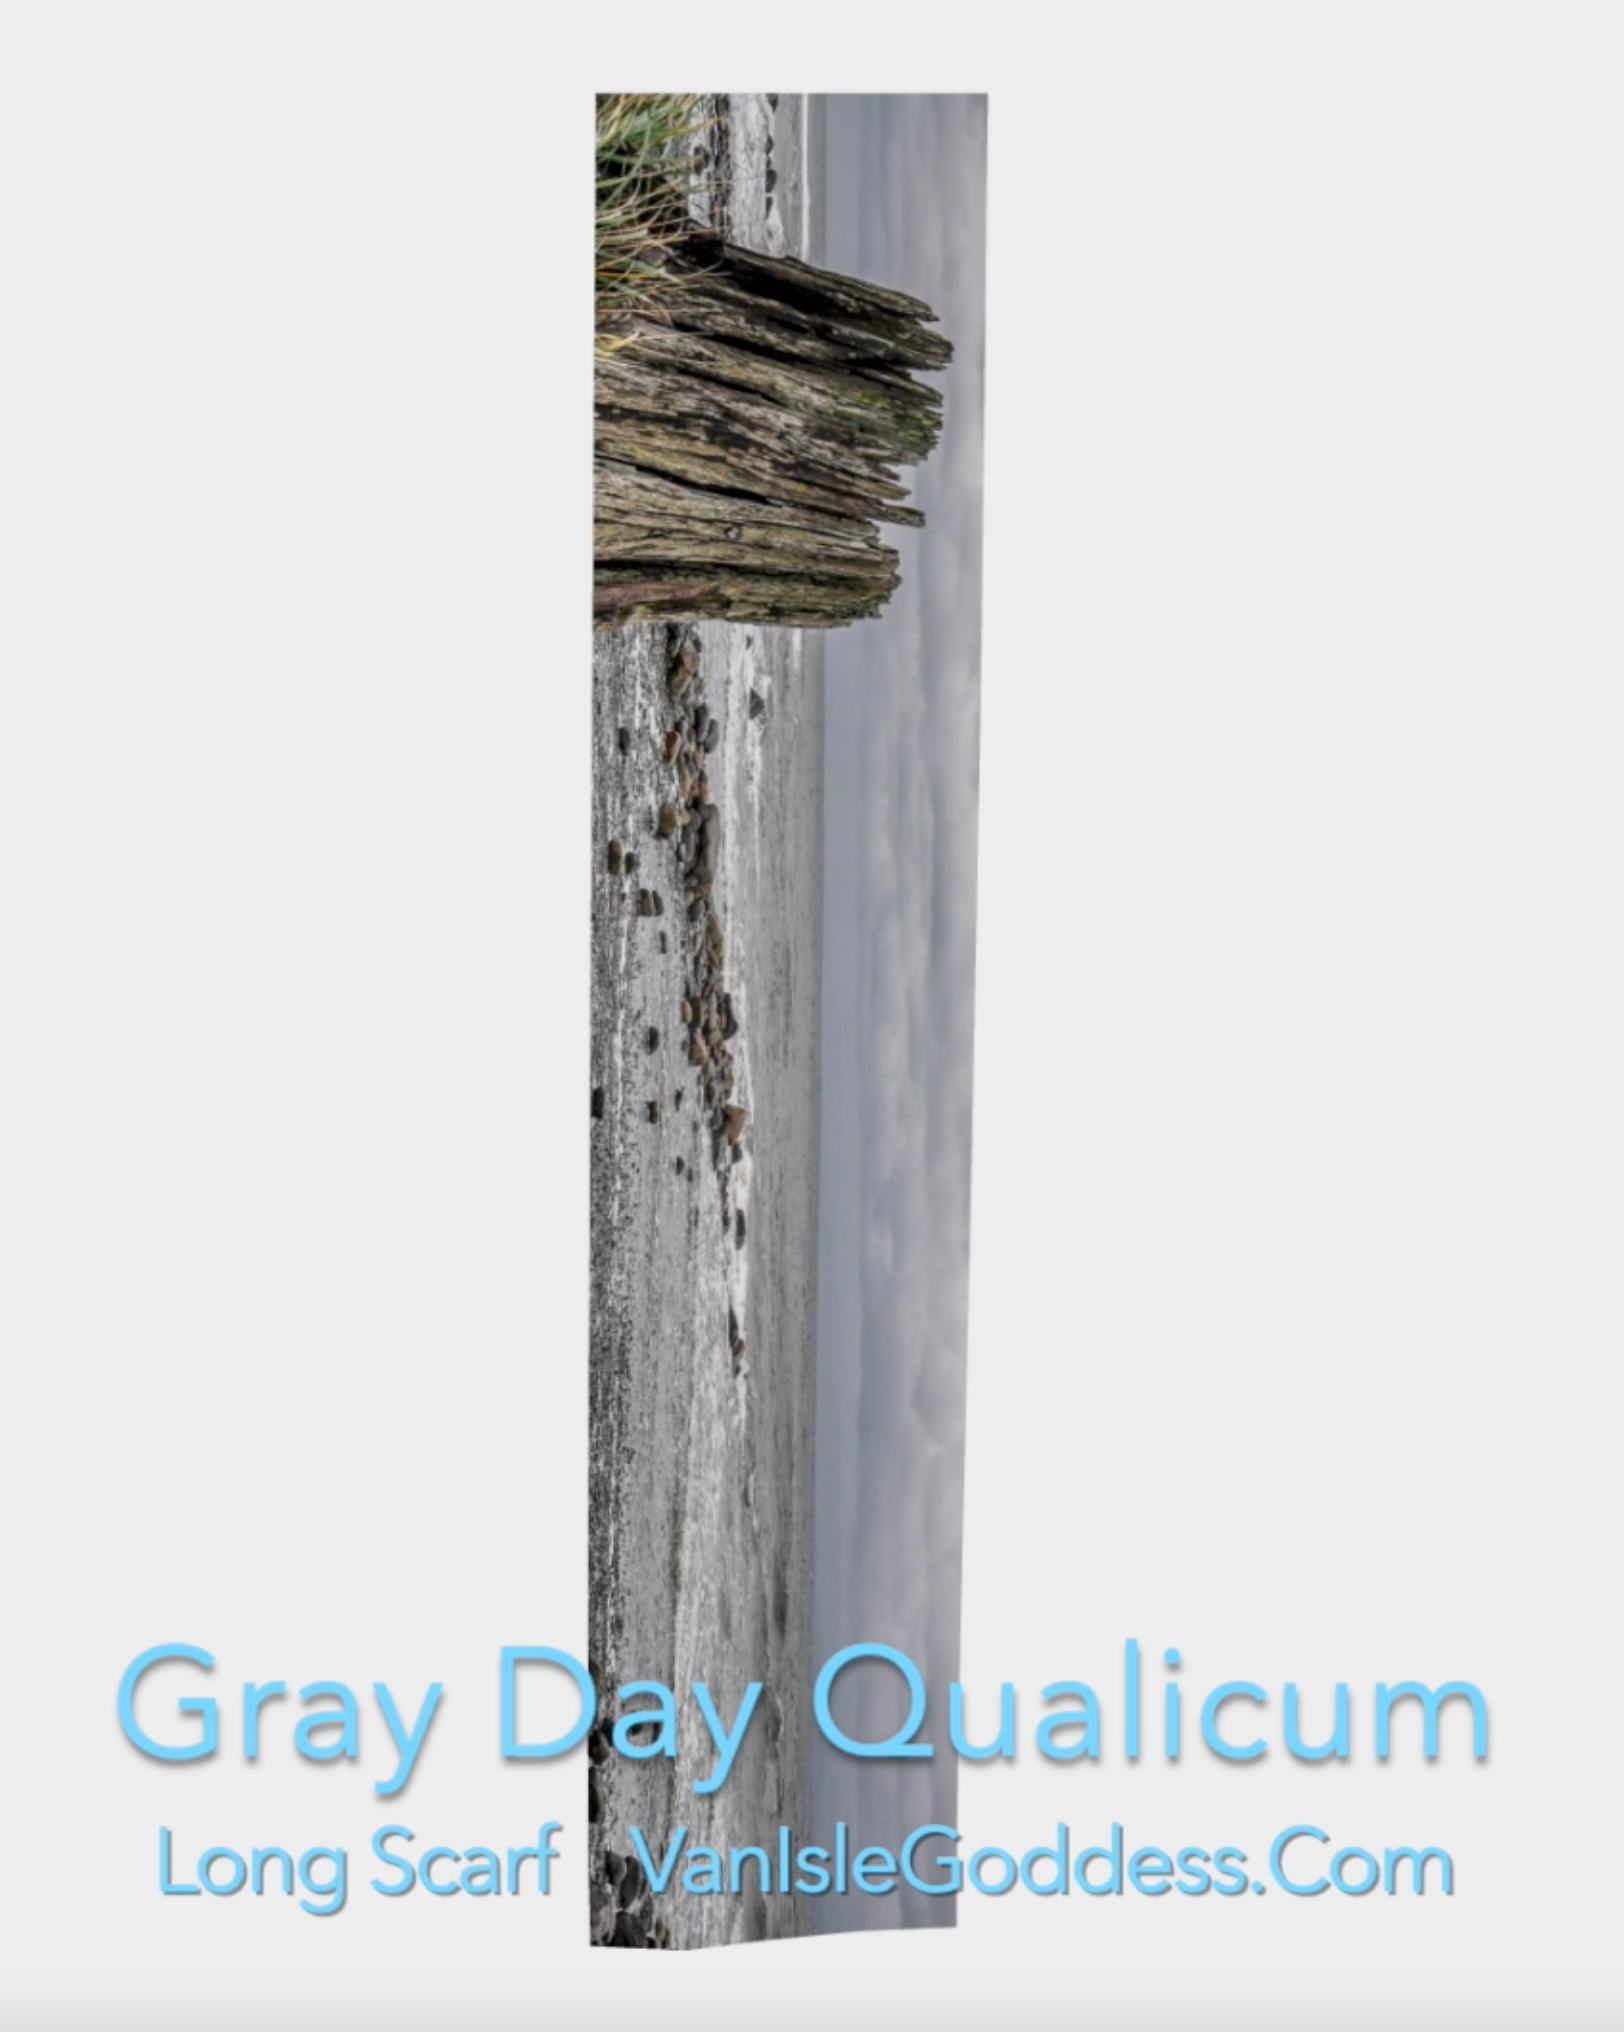 Gray Day Qualicum Beach long scarf is shown in its full length to show the entire image.